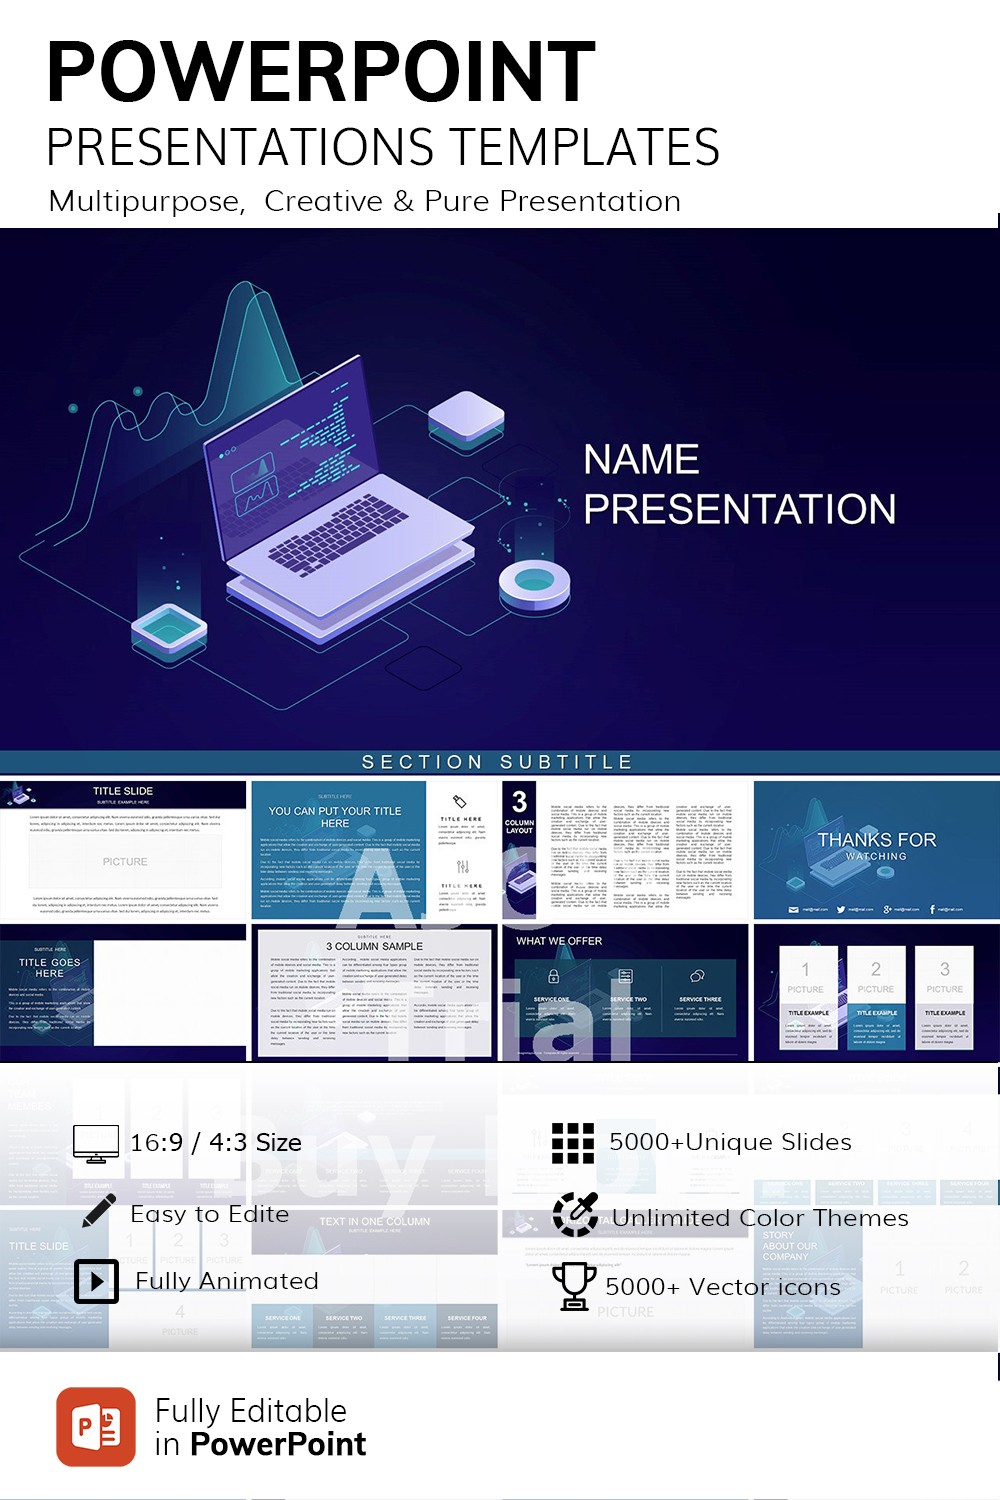 software company presentation ppt free download